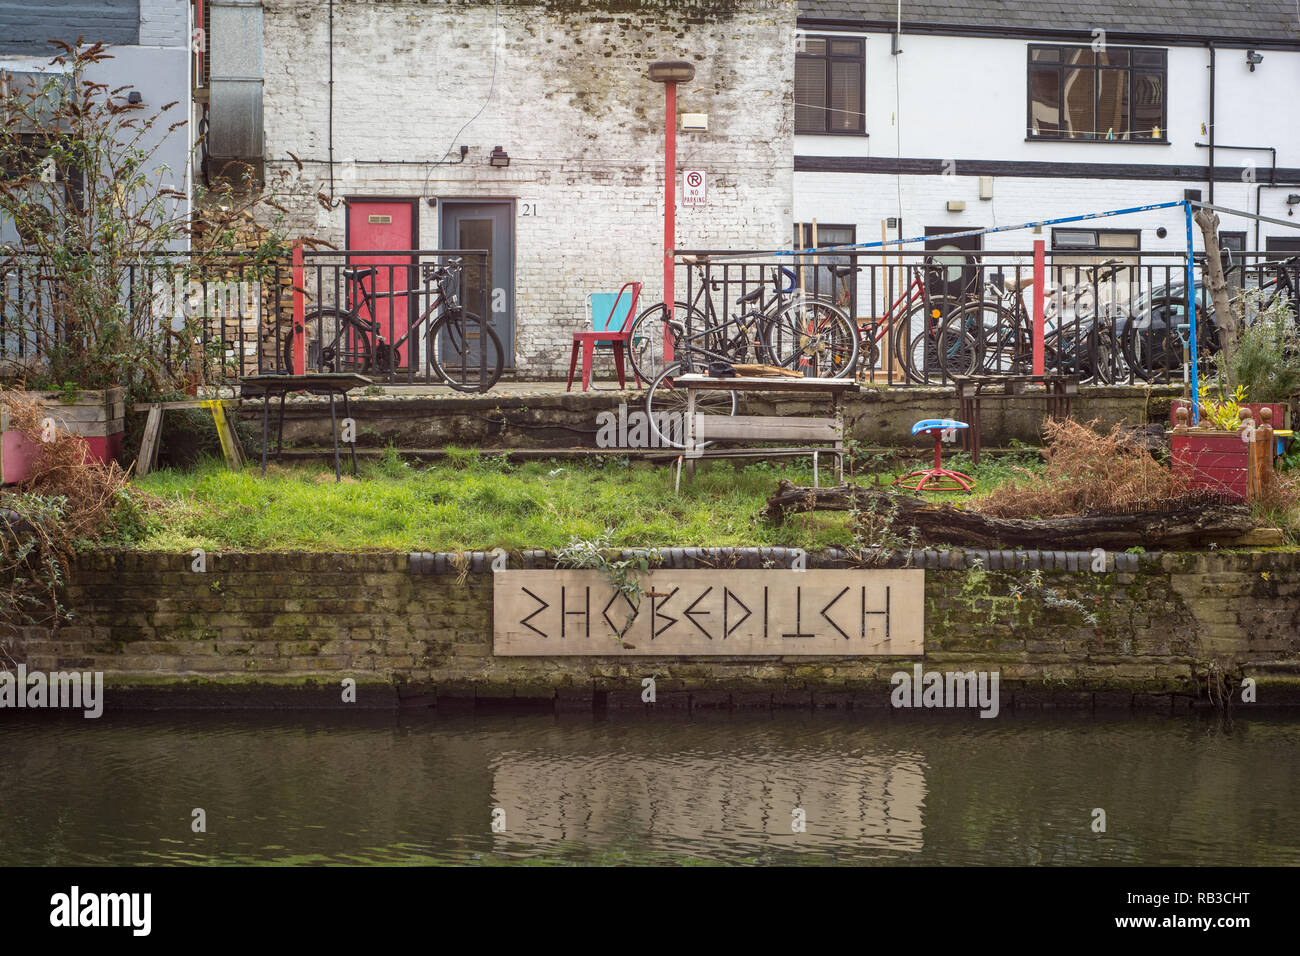 Canal side sign with rune like lettering Shoreditch, busy scene with bikes by railings Stock Photo